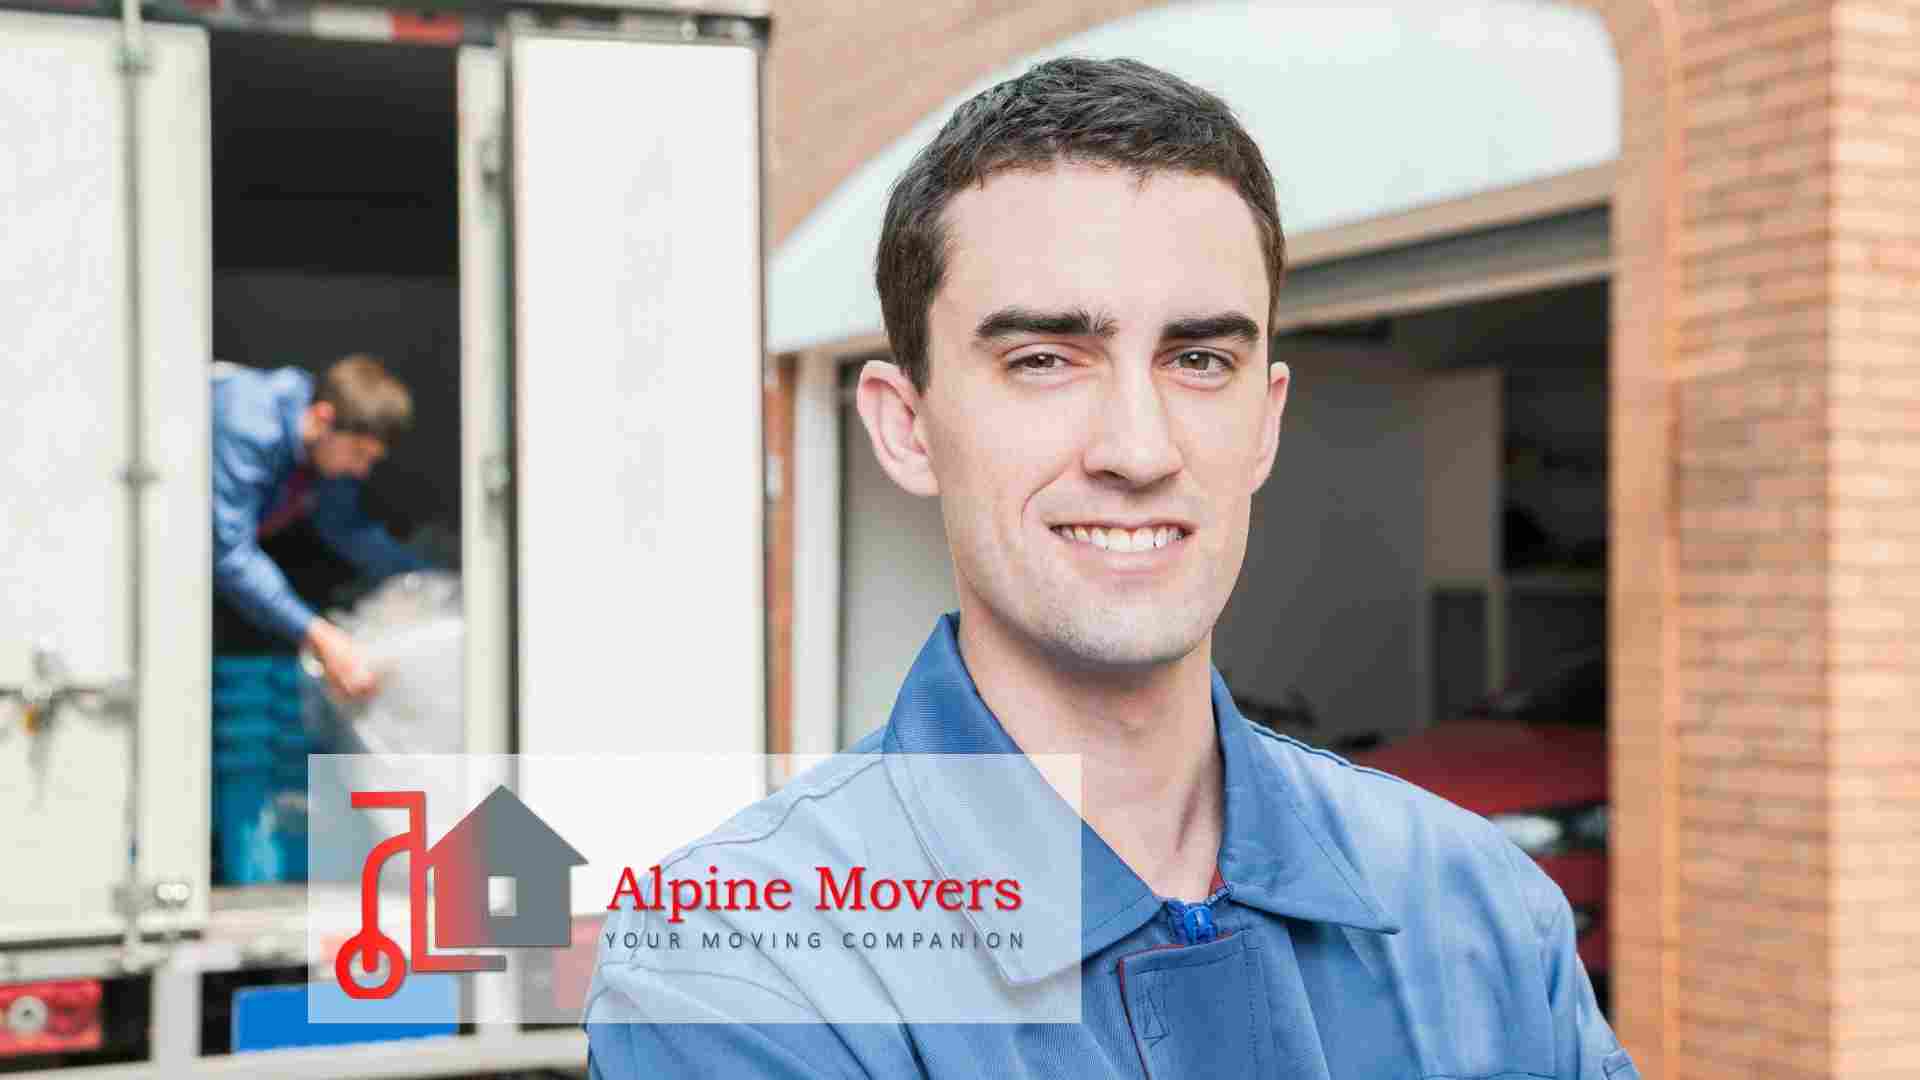 Alpine movers will support you in all moving tasks.